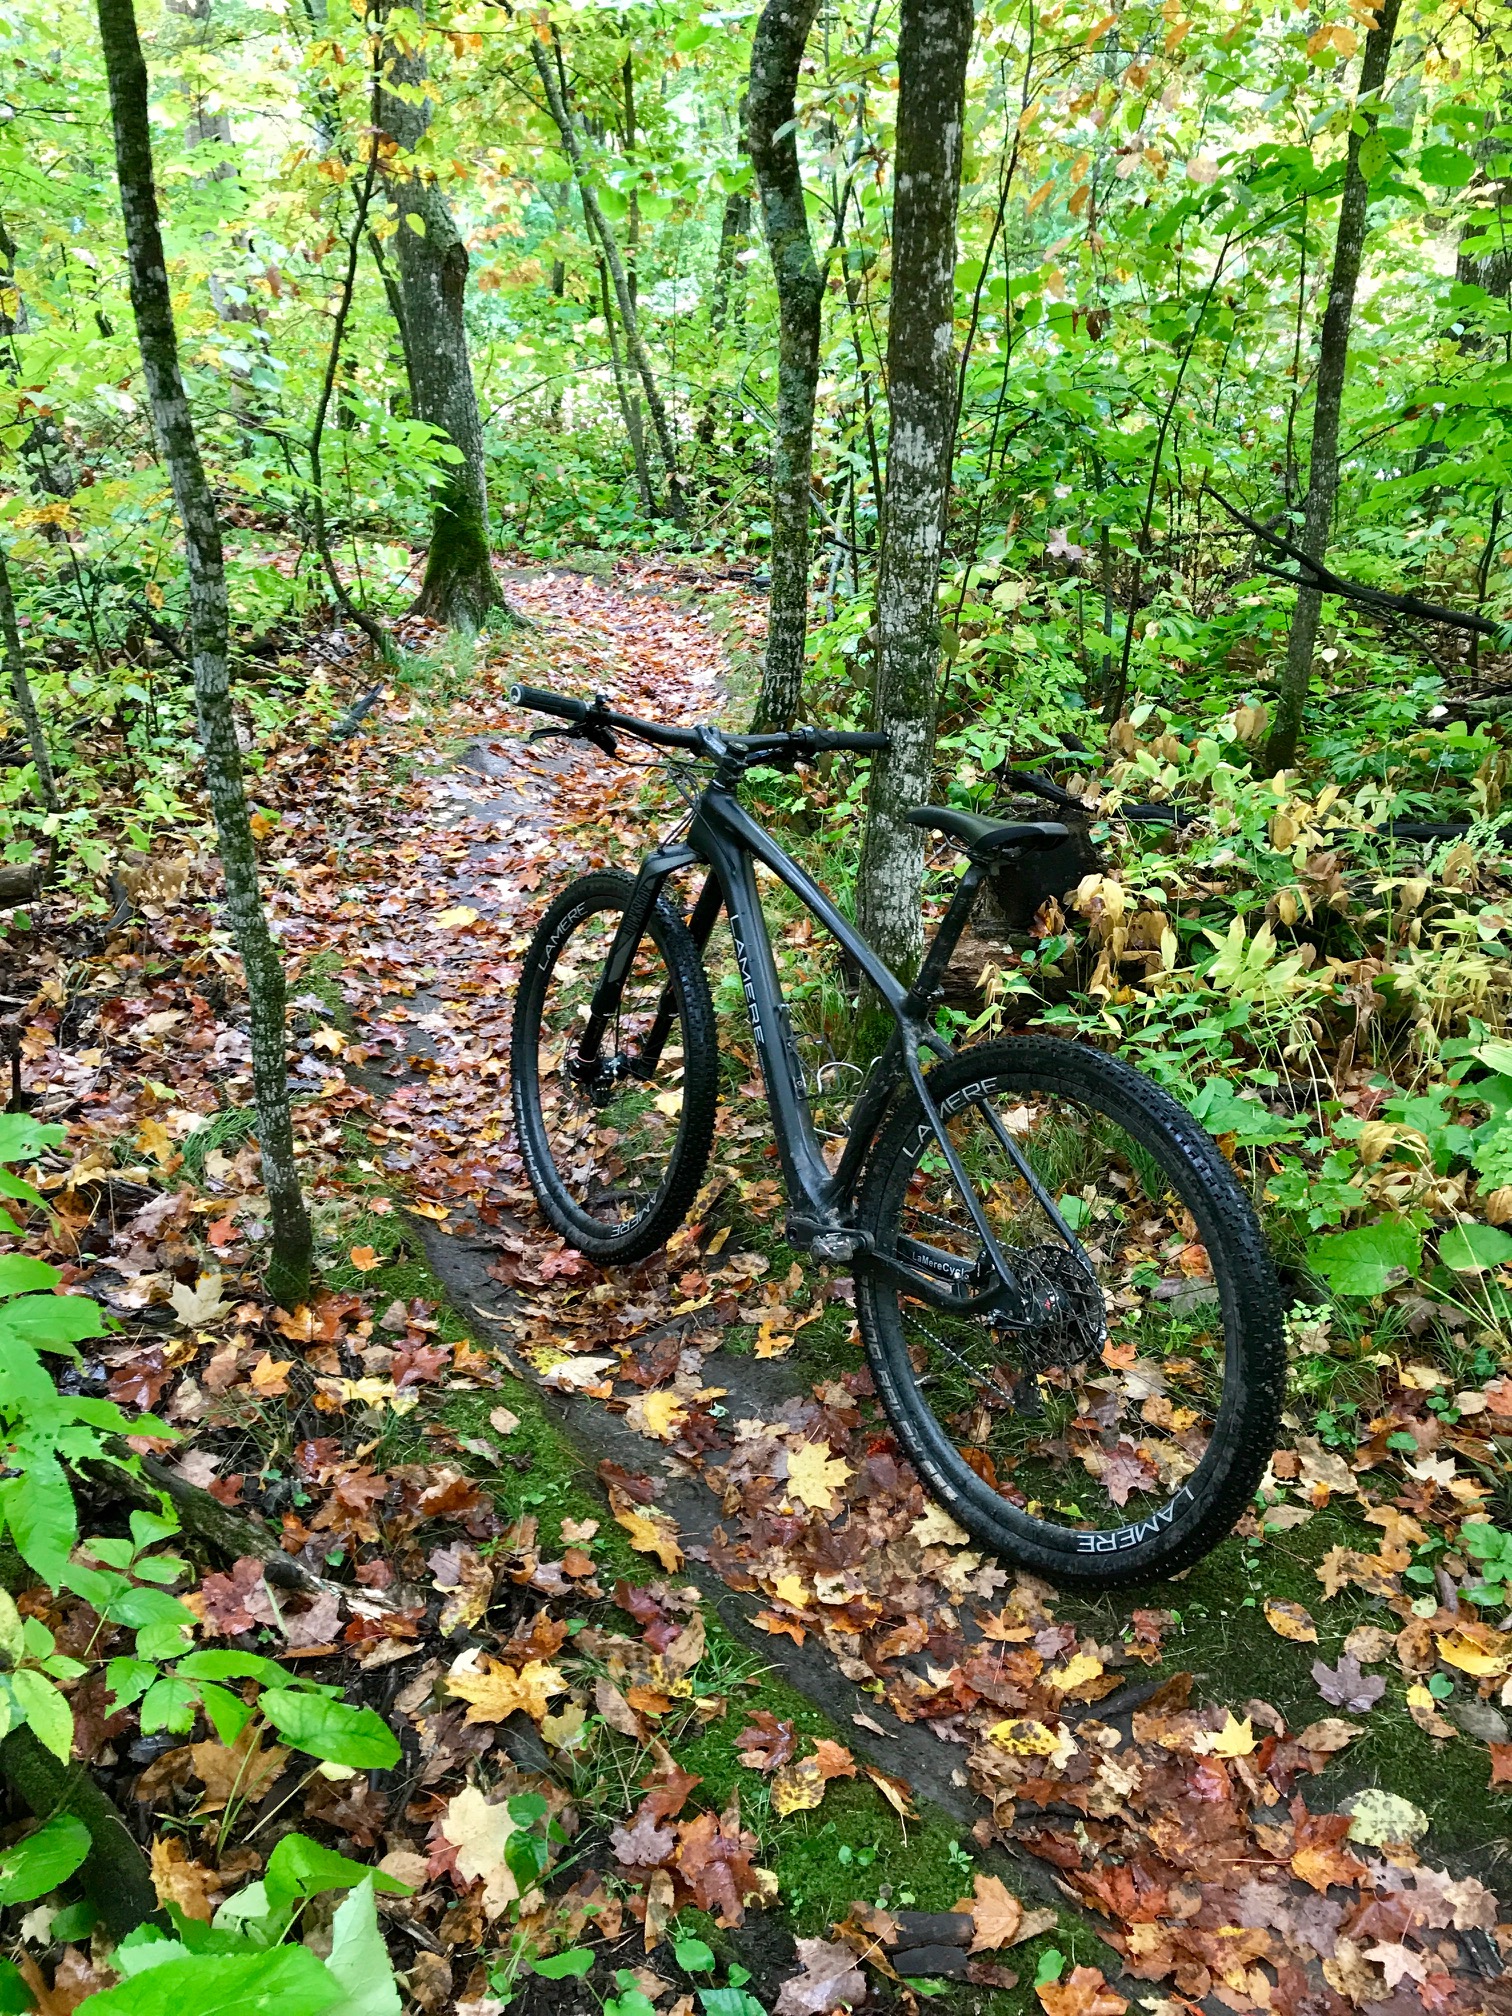 Leaf bed on the singletrack. Solid deck underneath. September 17th, 2017.